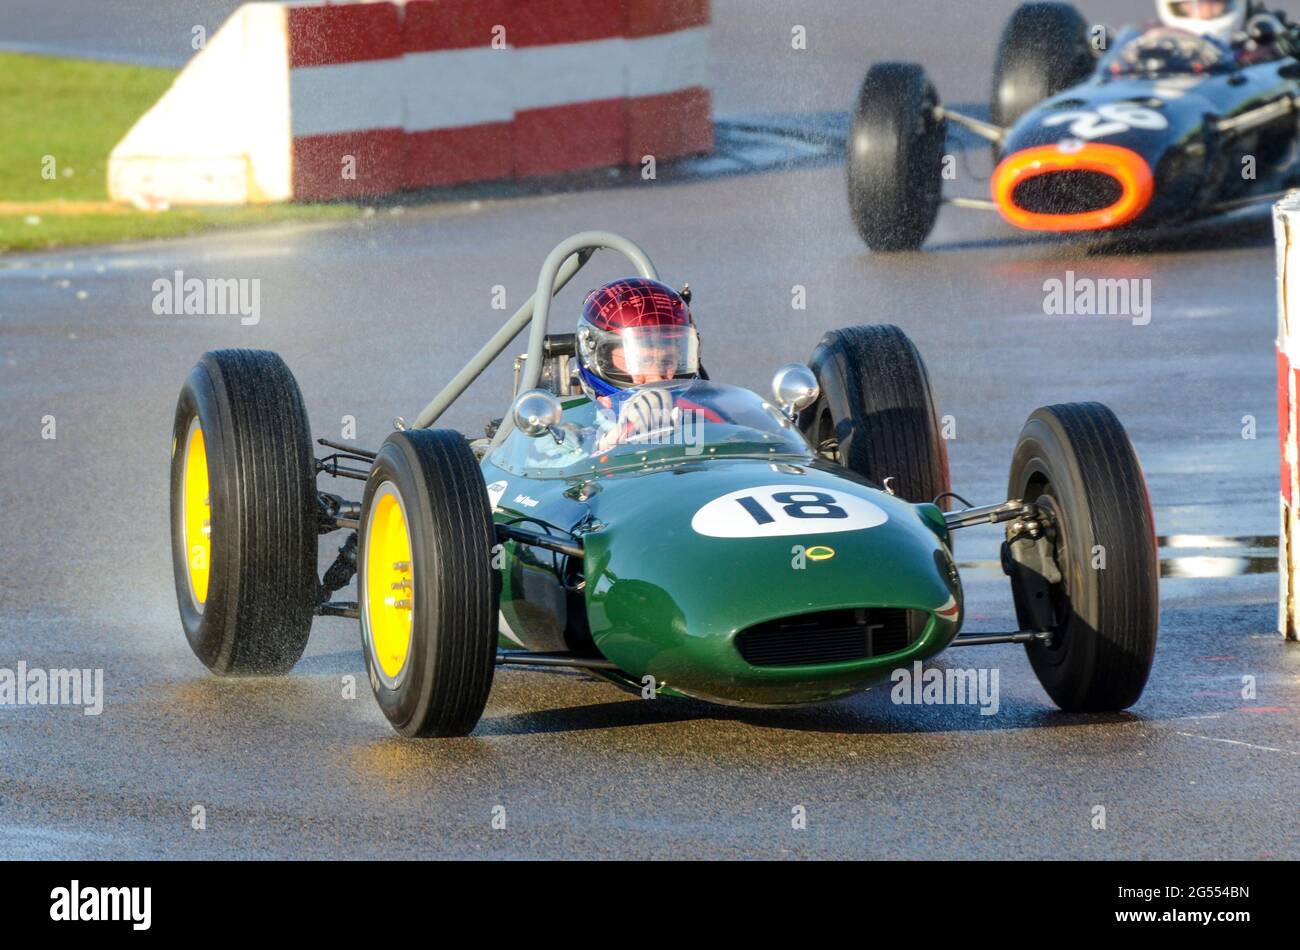 Classic Lotus BRM 24 racing car racing in the Glover Trophy at the Goodwood Revival 2011, on a wet track after rain. Vintage Grand Prix car Stock Photo